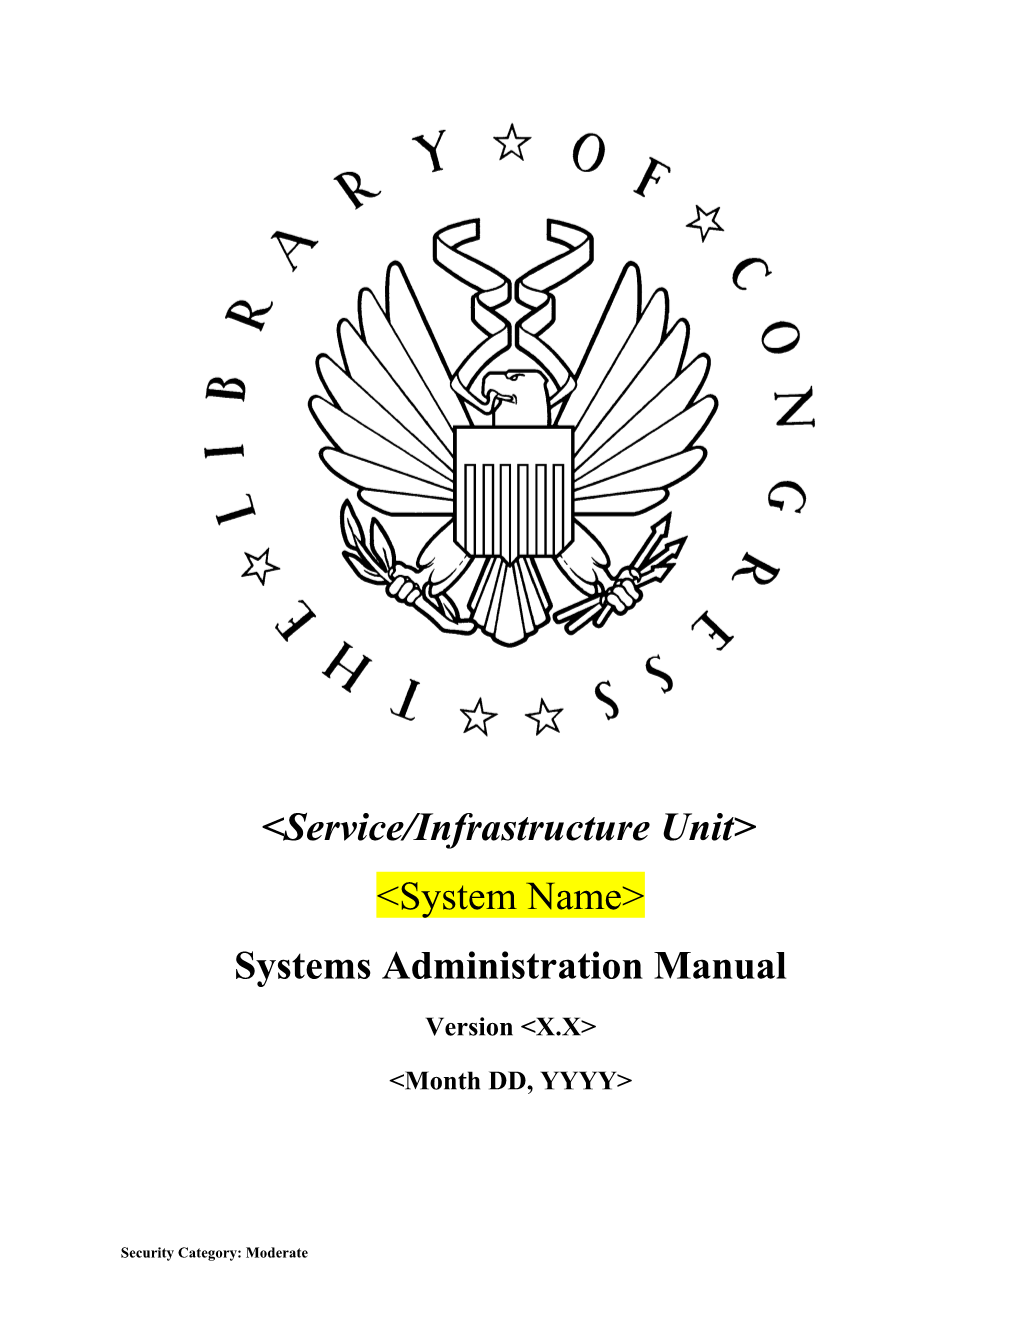 Template for IT Security Relevant Sections of the Systems Administration Manual